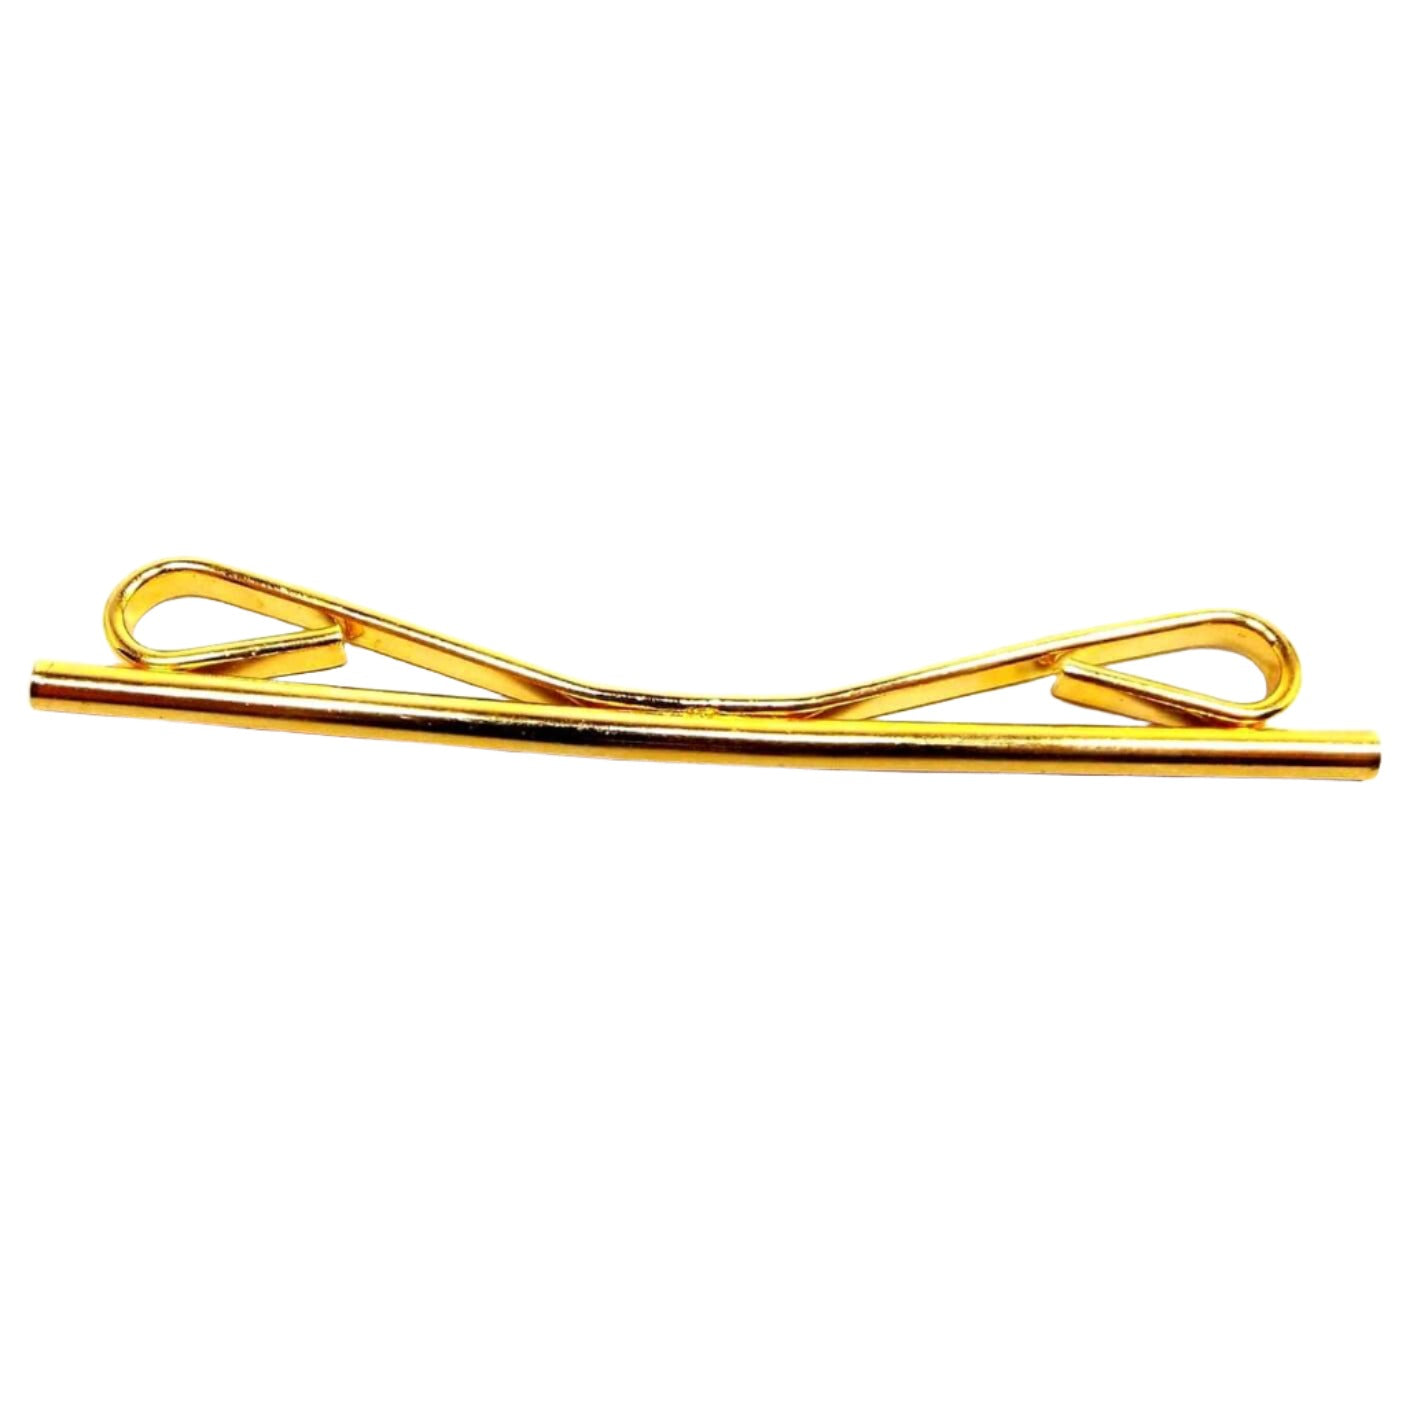 Front view of the retro vintage collar clip. It is gold tone in color and has an almost straight slightly curved bar on the front.